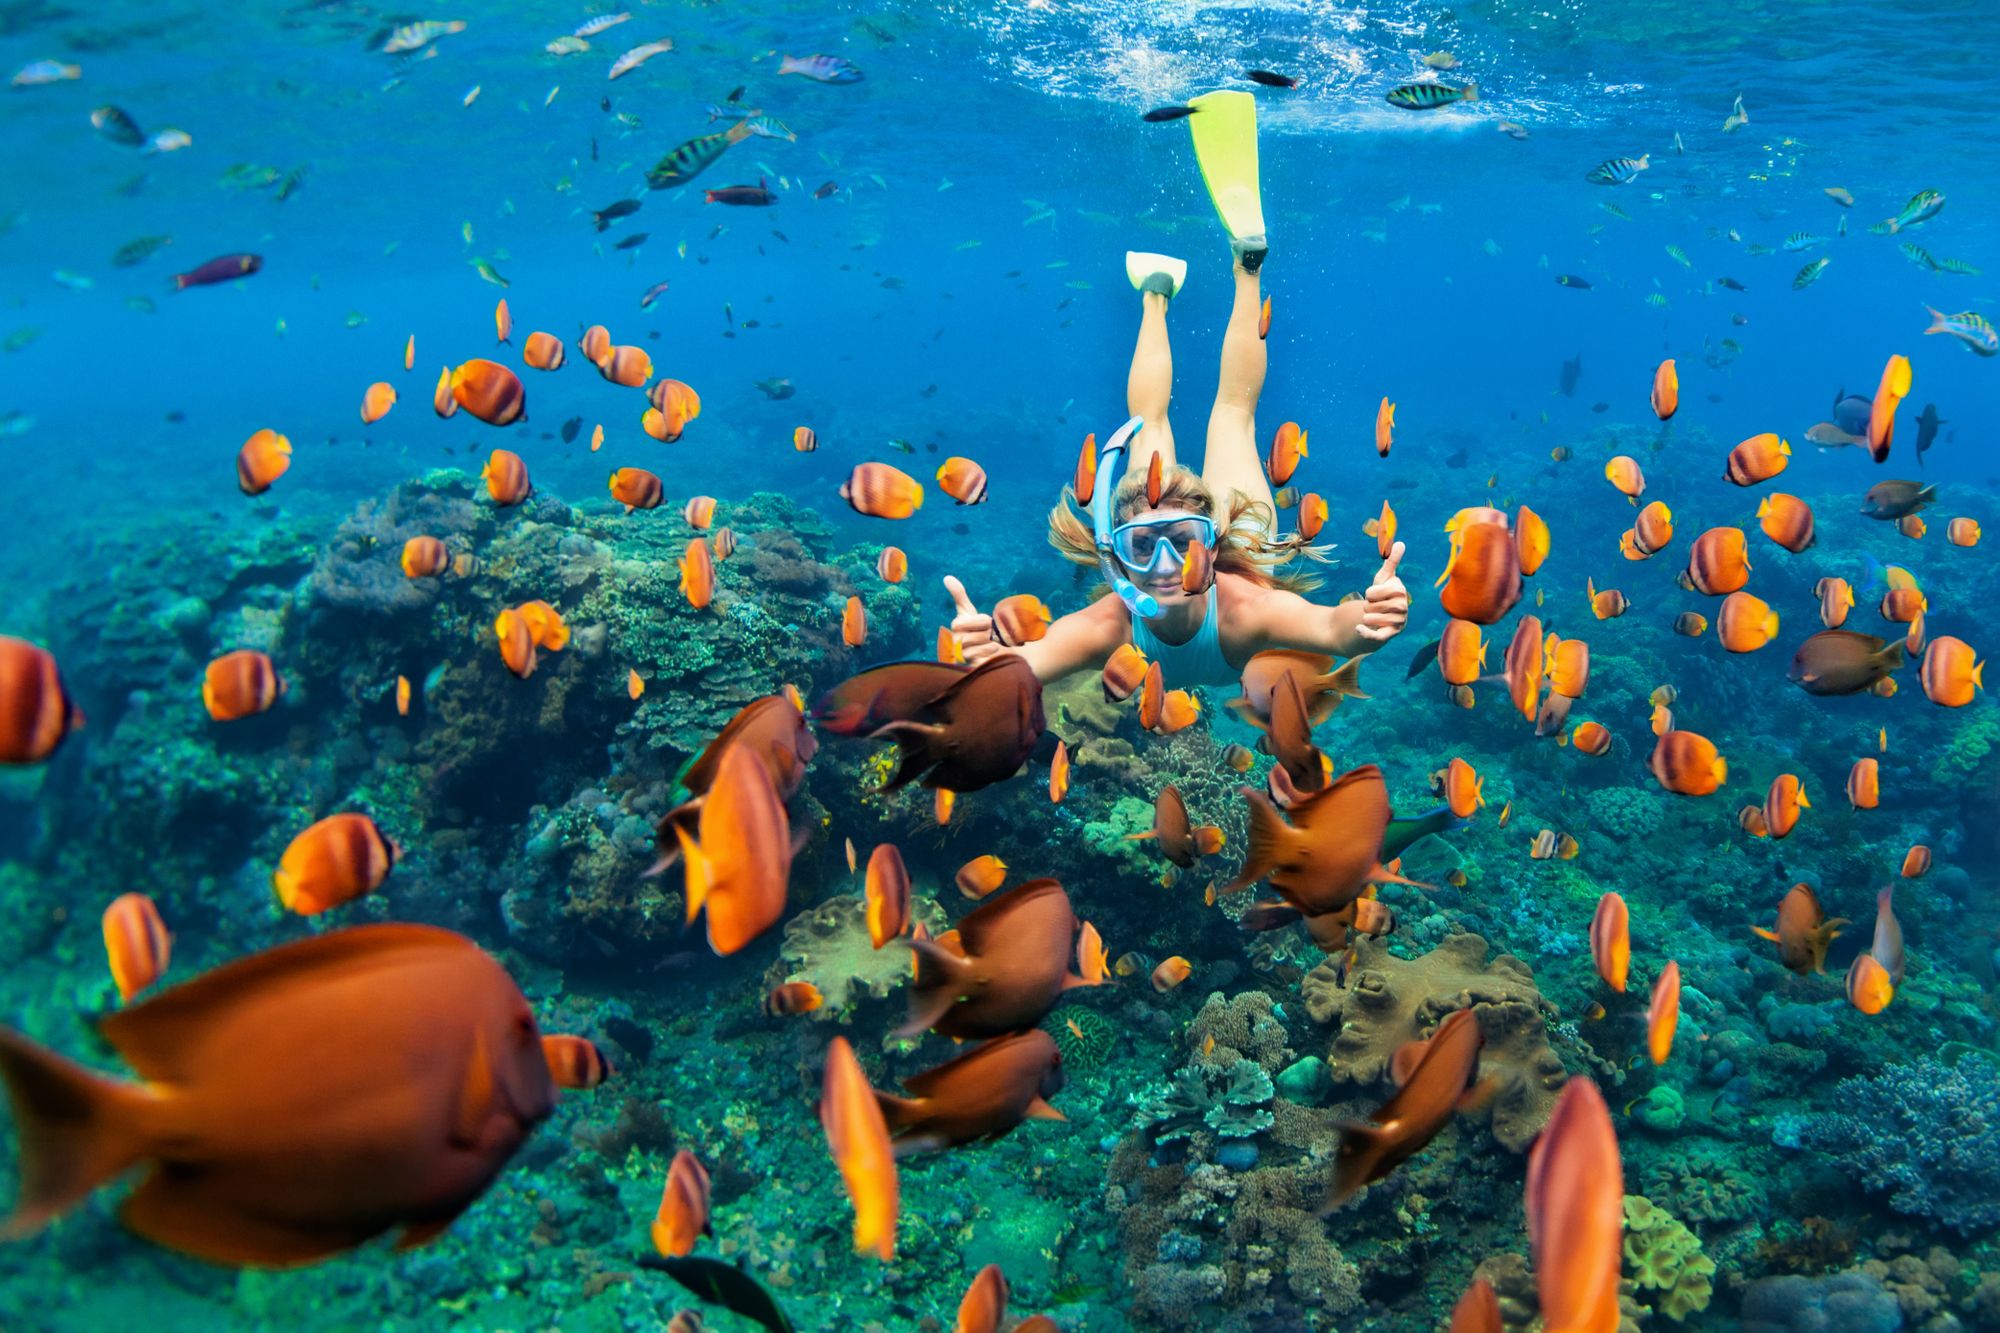 The Best Snorkeling In The Caribbean For An Exceptional Underwater Adventure!